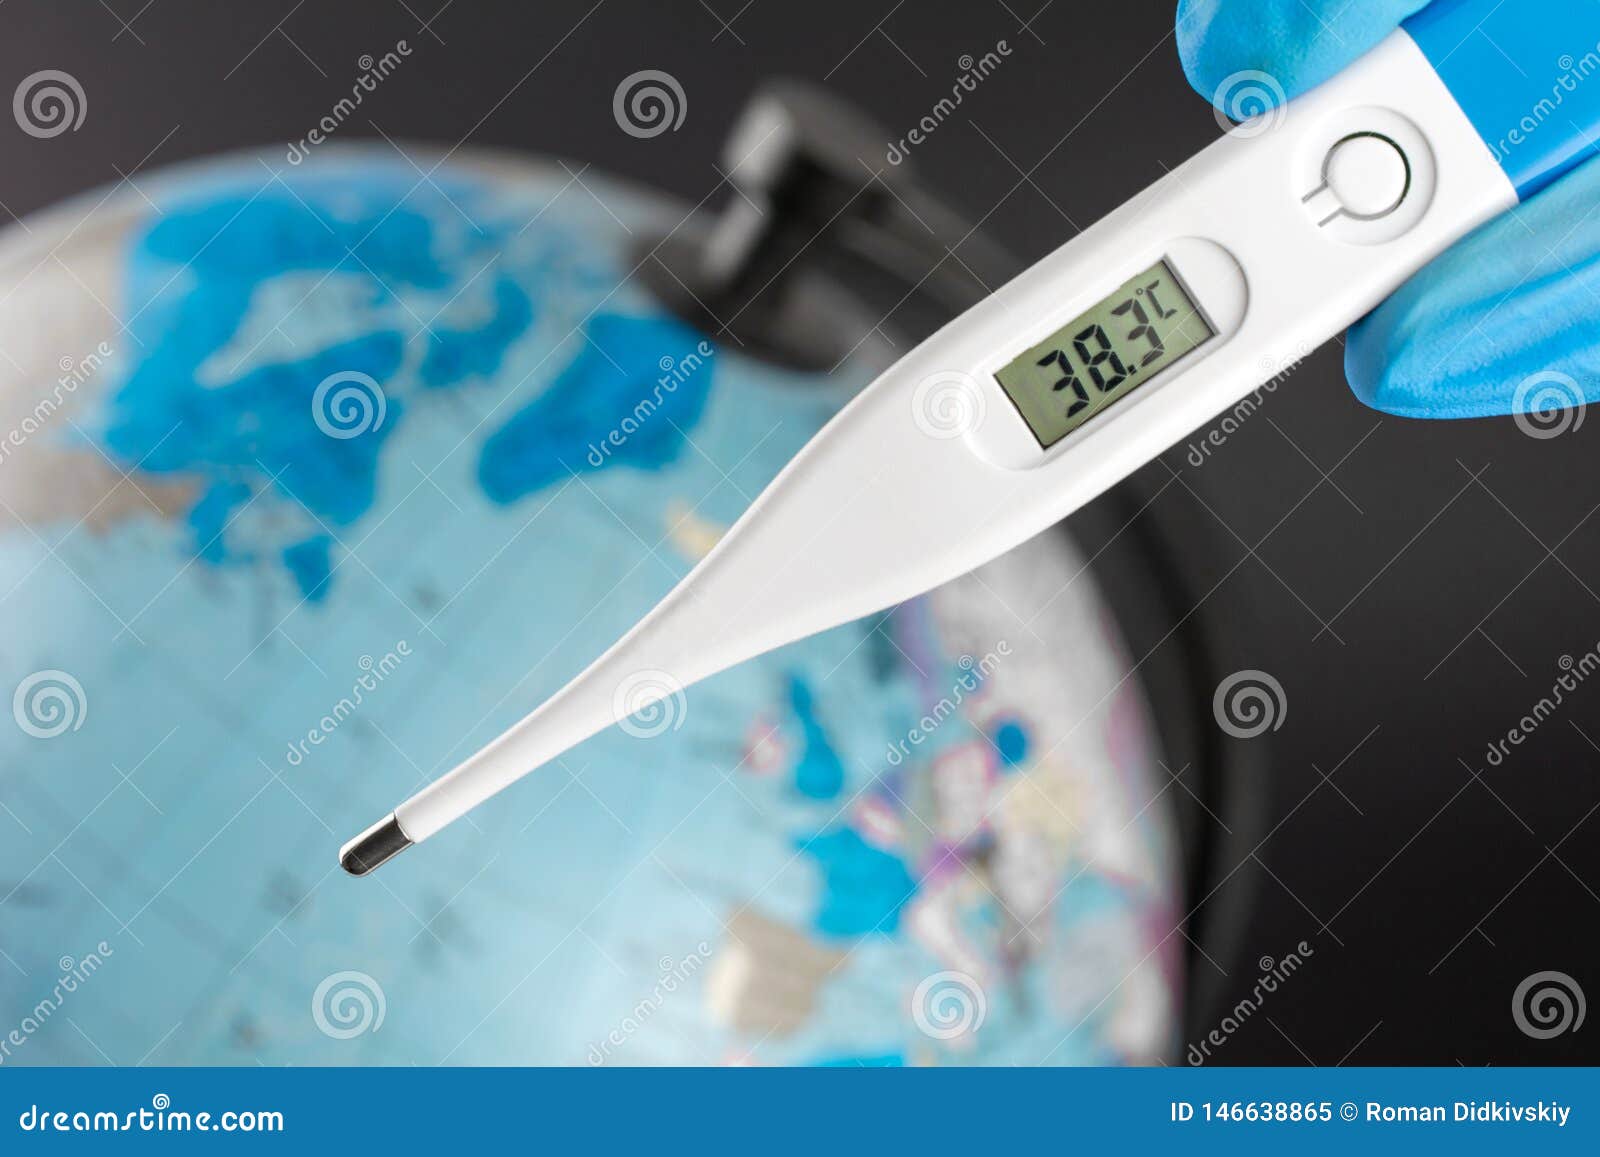 https://thumbs.dreamstime.com/z/global-warming-climate-change-illustration-sick-earth-digital-electronic-thermometer-medical-display-degrees-celsius-146638865.jpg